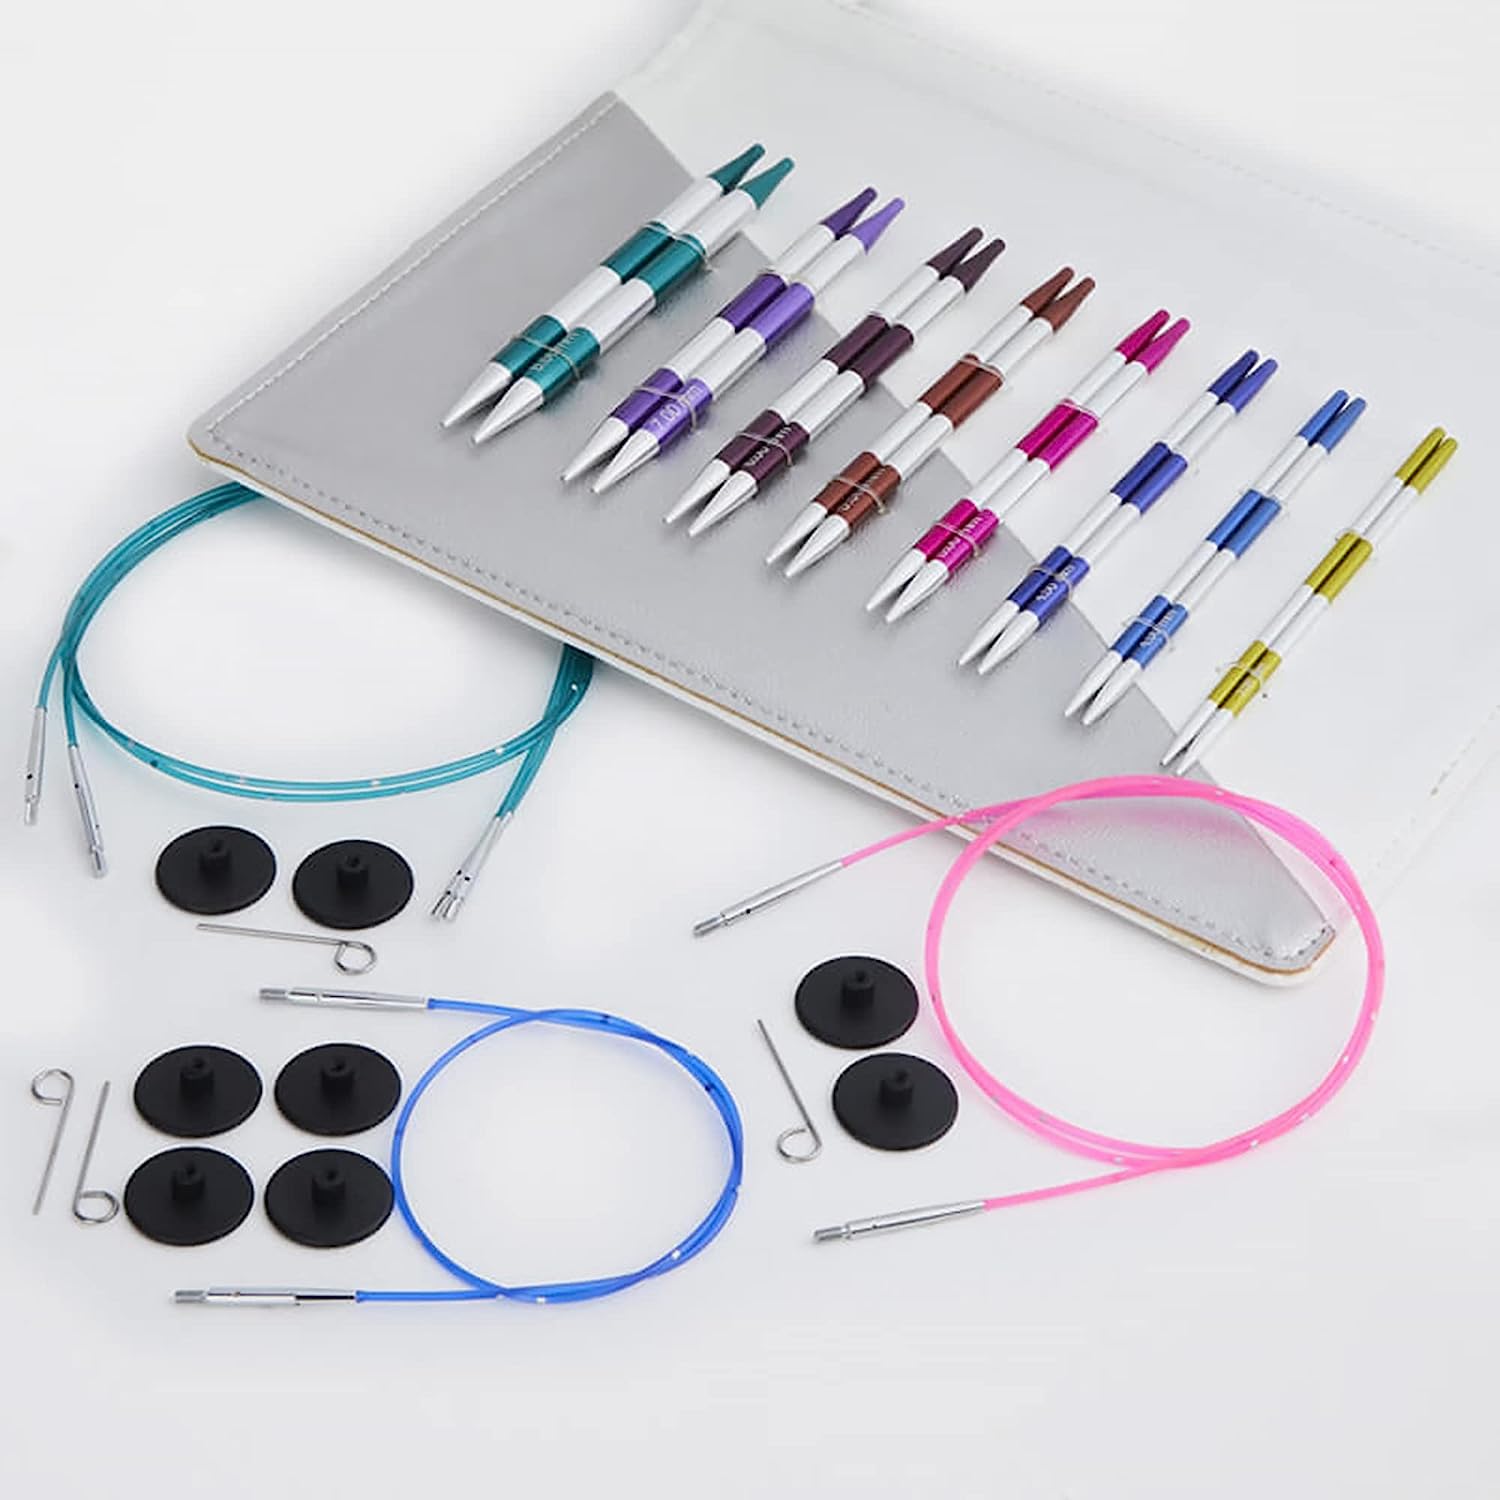 KnitPro Smart Stix Deluxe Interchangeable Circular Knitting Set Accessories Included